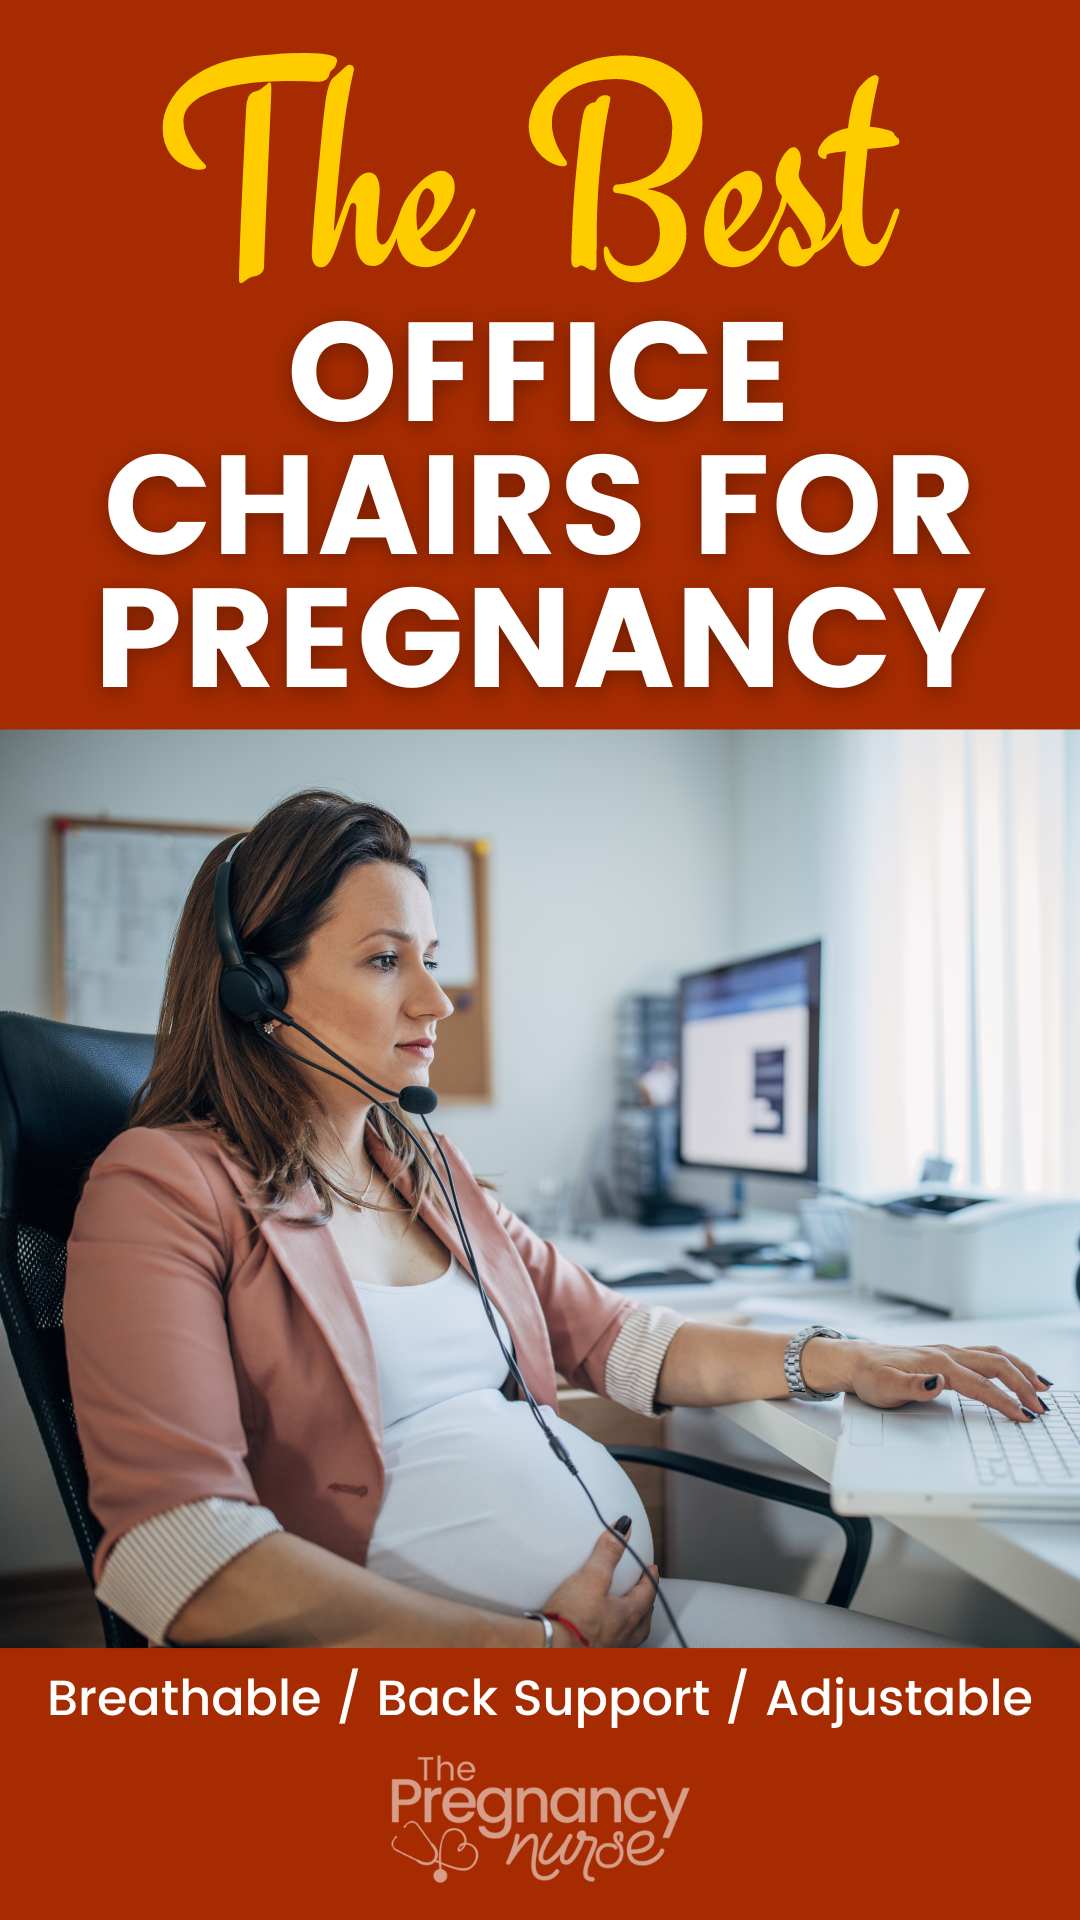 The best office chairs for pregnant women will provide lumbar support and provider for a comfortable office environment for mom and baby.